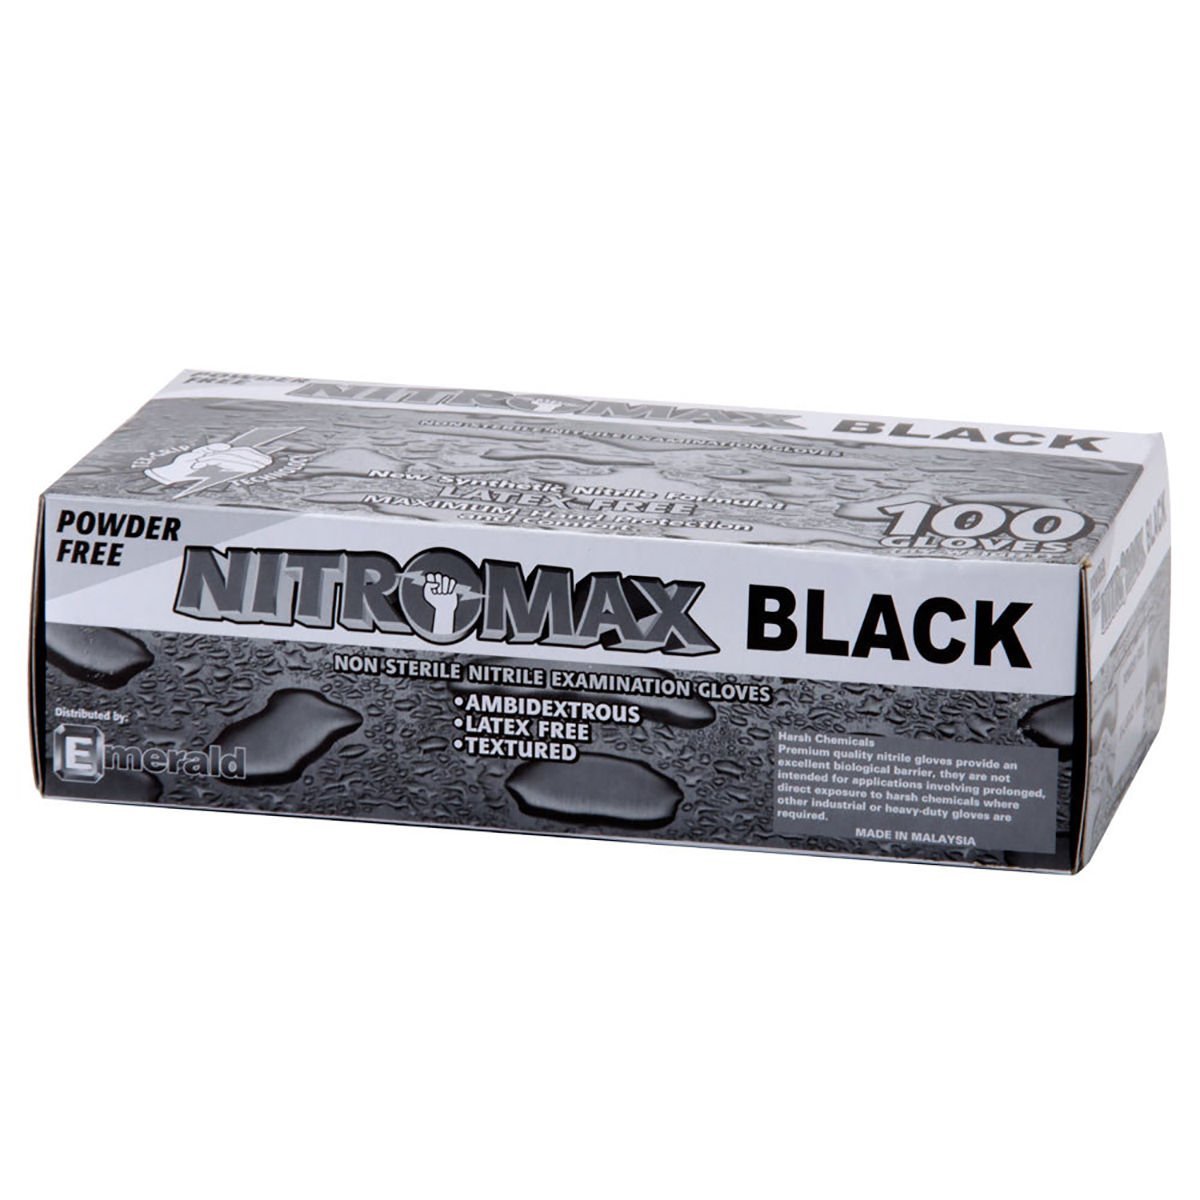  Emerald Personal Protection Products NitroMax Black Nitrile Exam Gloves 